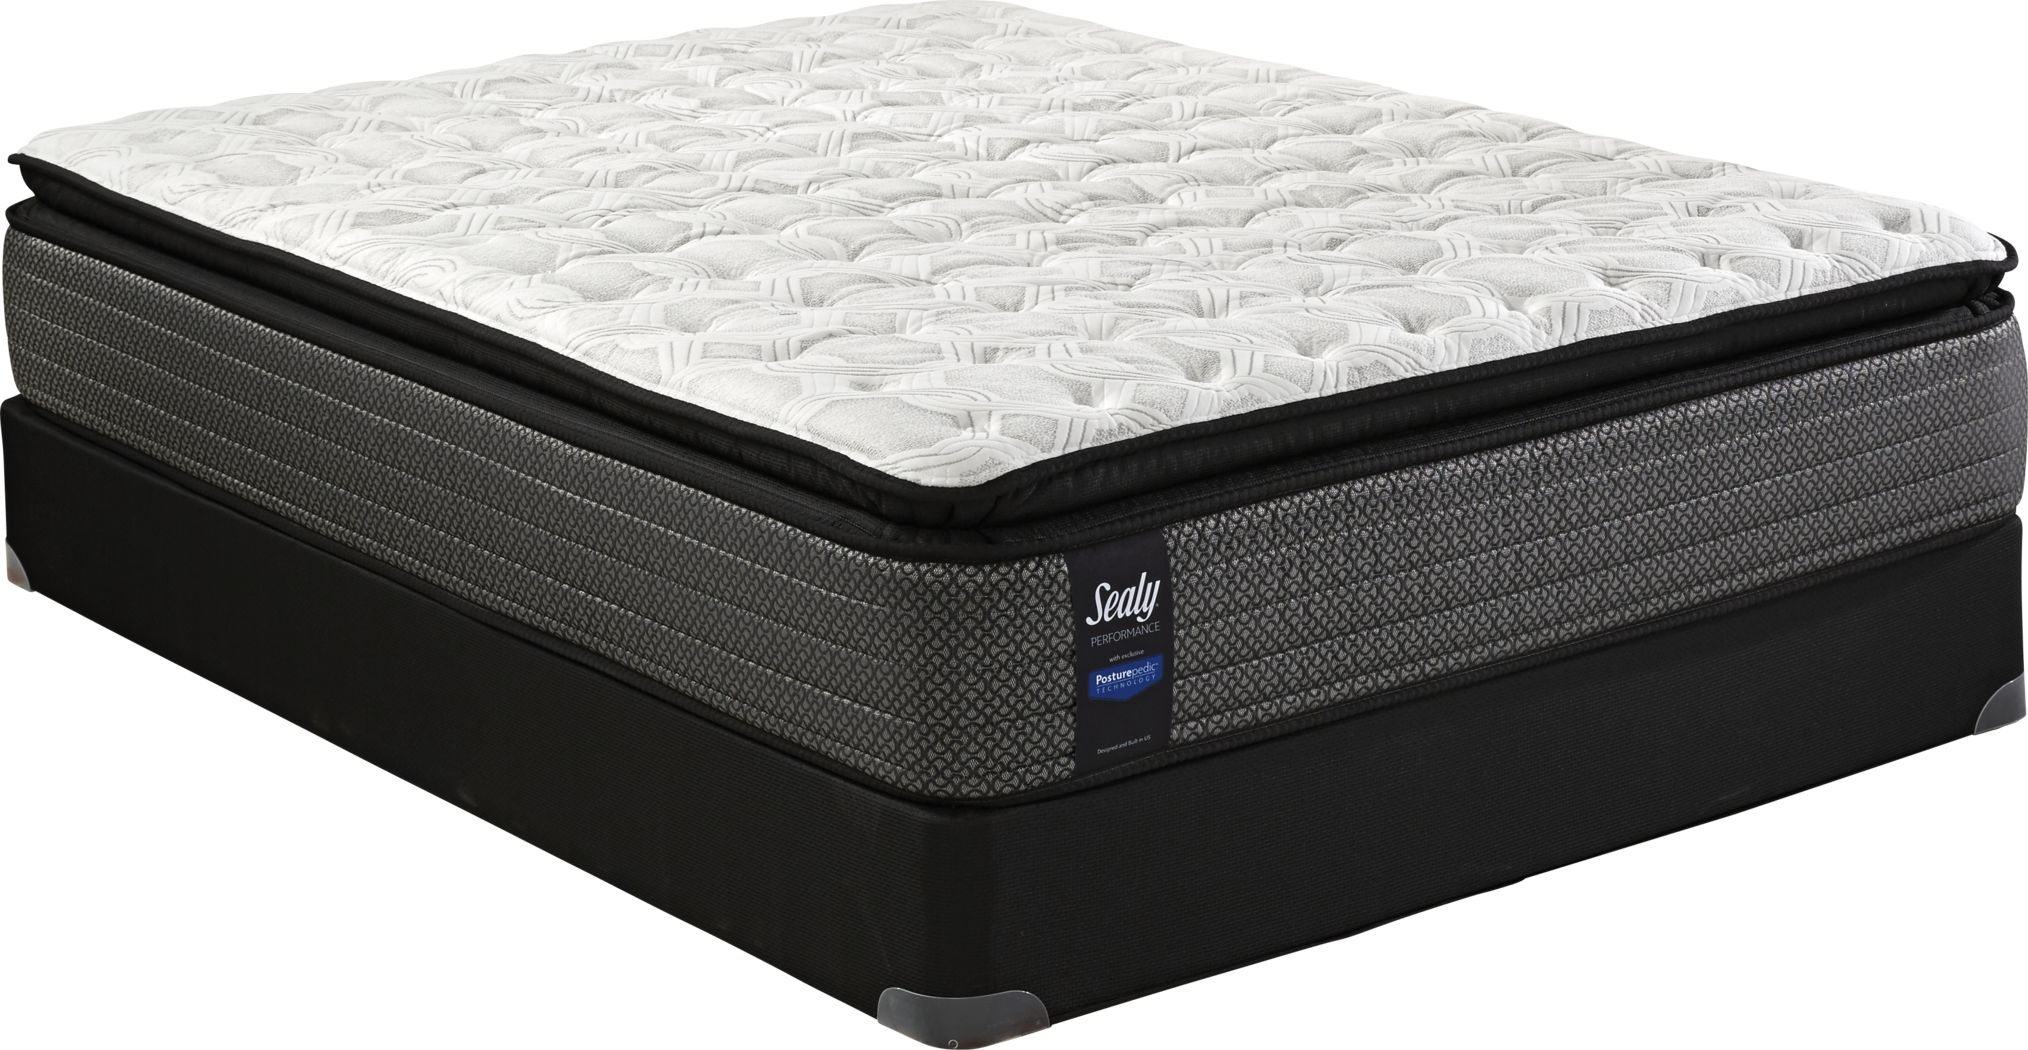 sealy glacier firm queen mattress and boxspring set